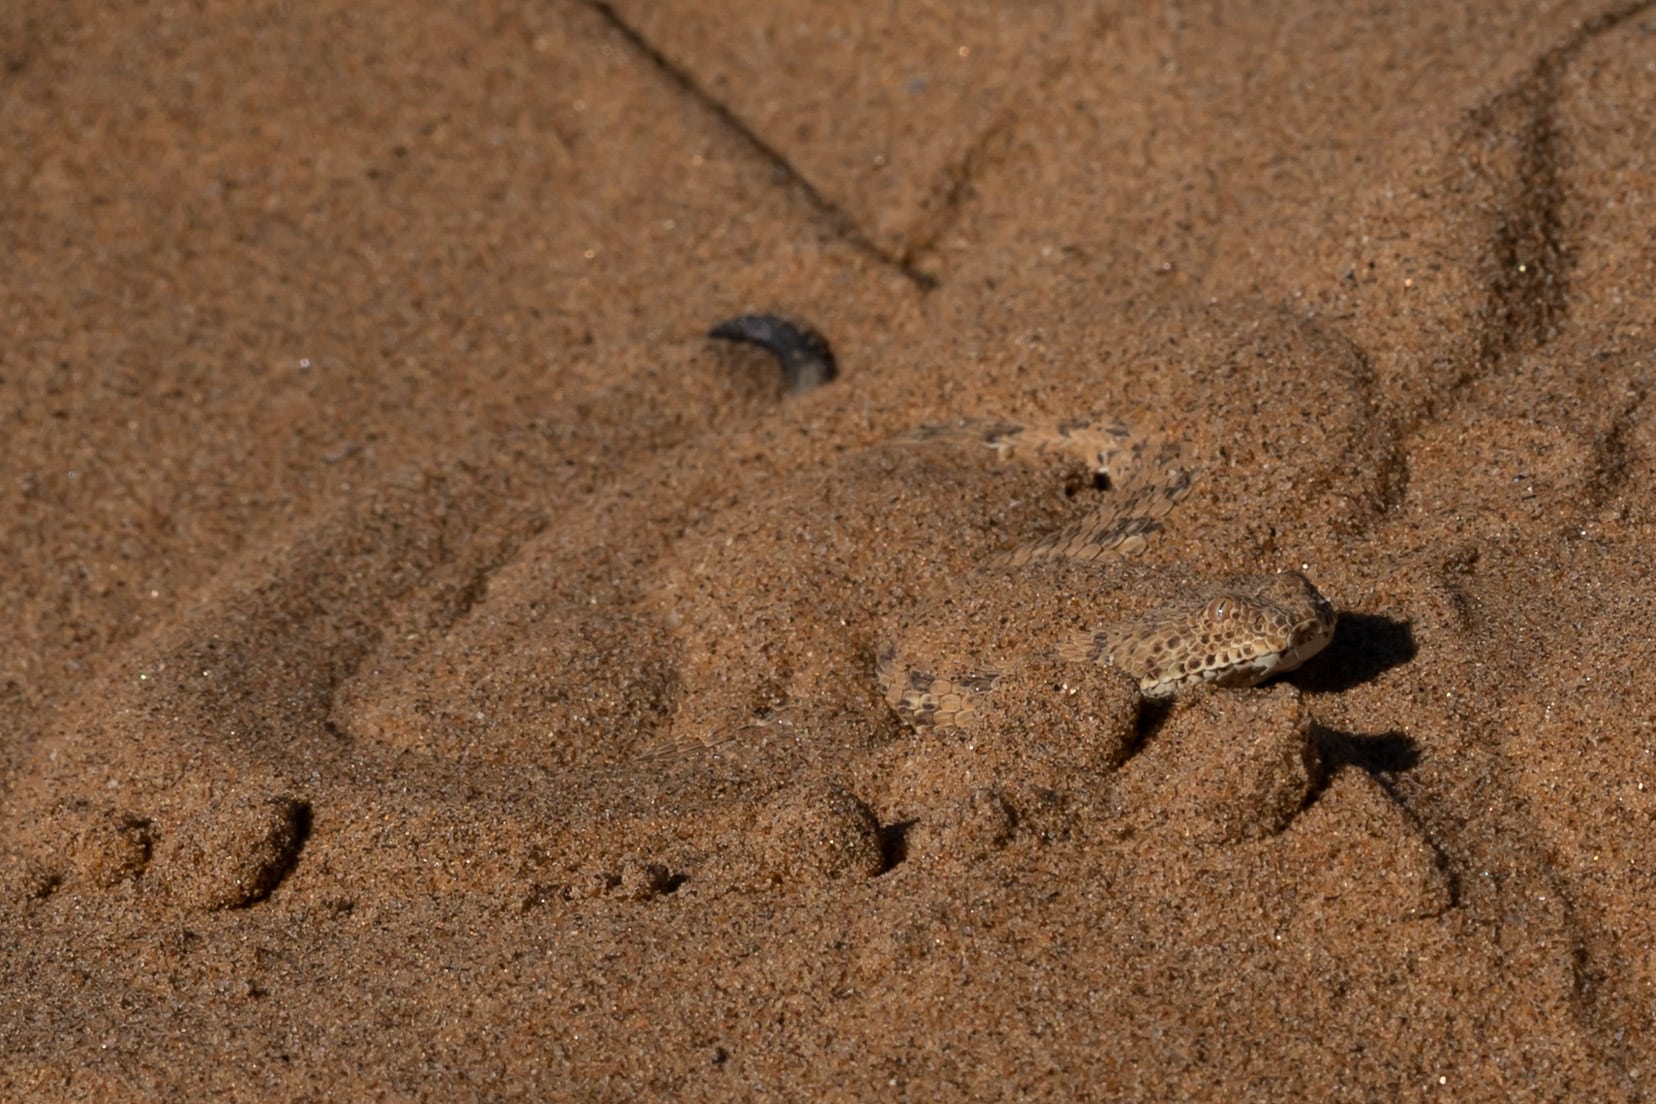 Adder-with-head-out-of-sand